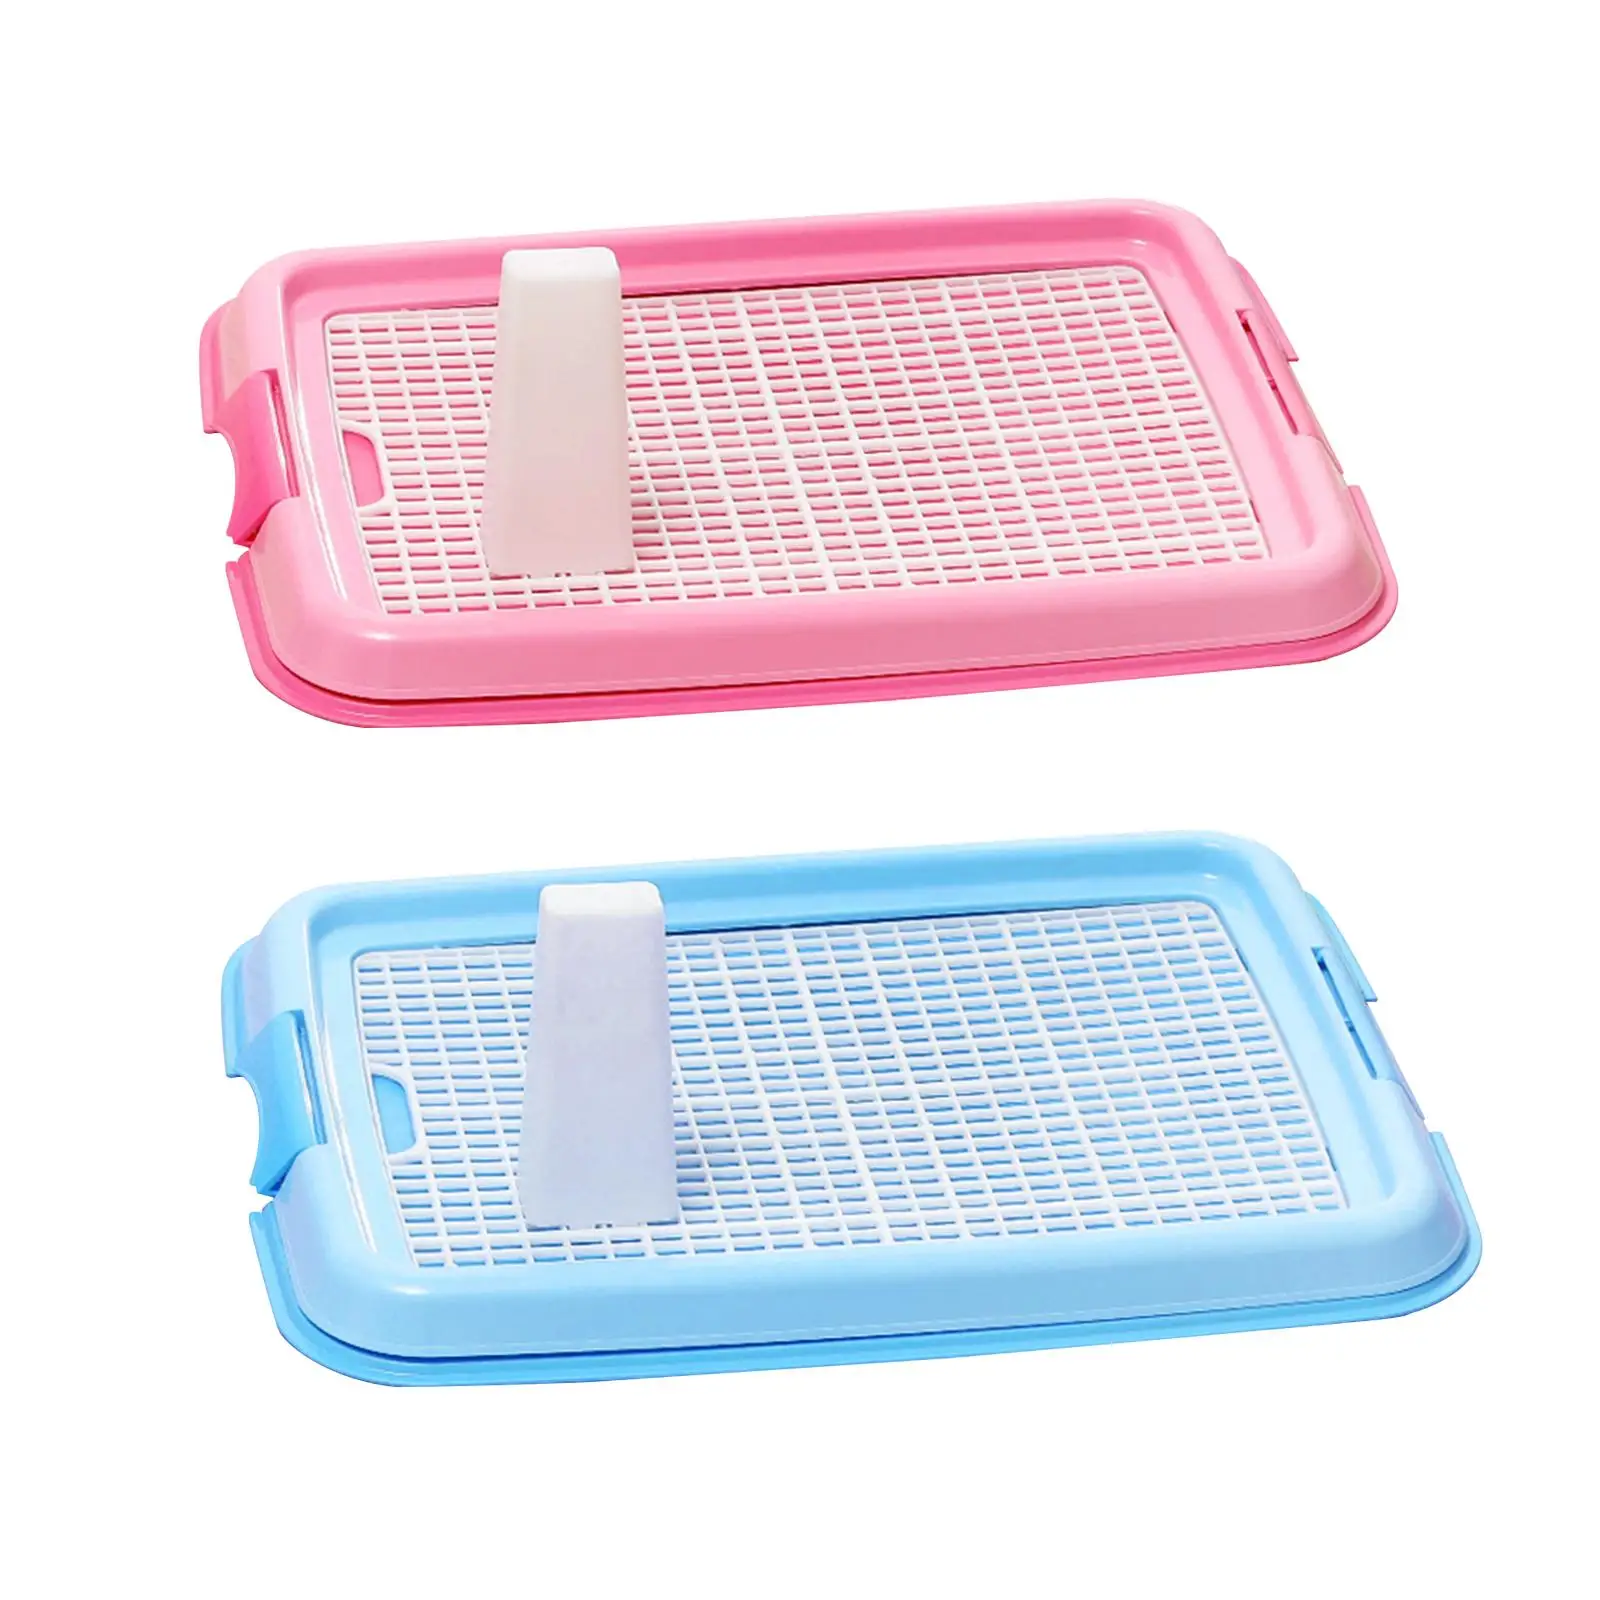 Pet Training Toilet Tray Mesh Grids Reusable Pee Pad Urinal Washable Dog Toilet for Cats Small Medium and Large Dogs Accessories